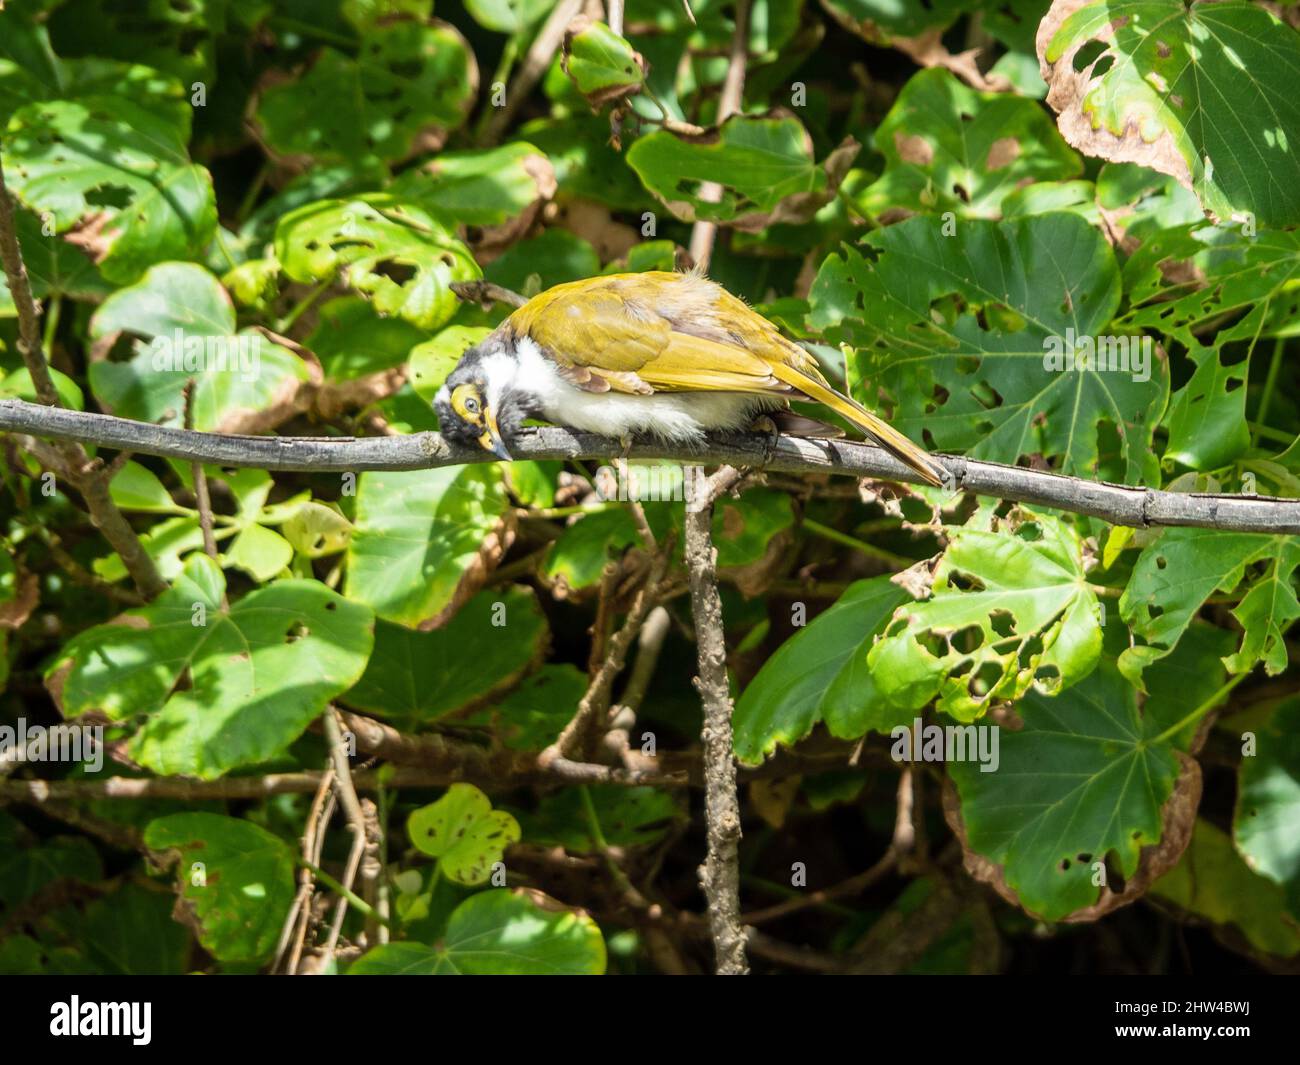 Birds. A young or fledgling Blue-Faced Honeyeater bird rubbing its face across the branch its perched on, sub tropical Australian coastal garden Stock Photo